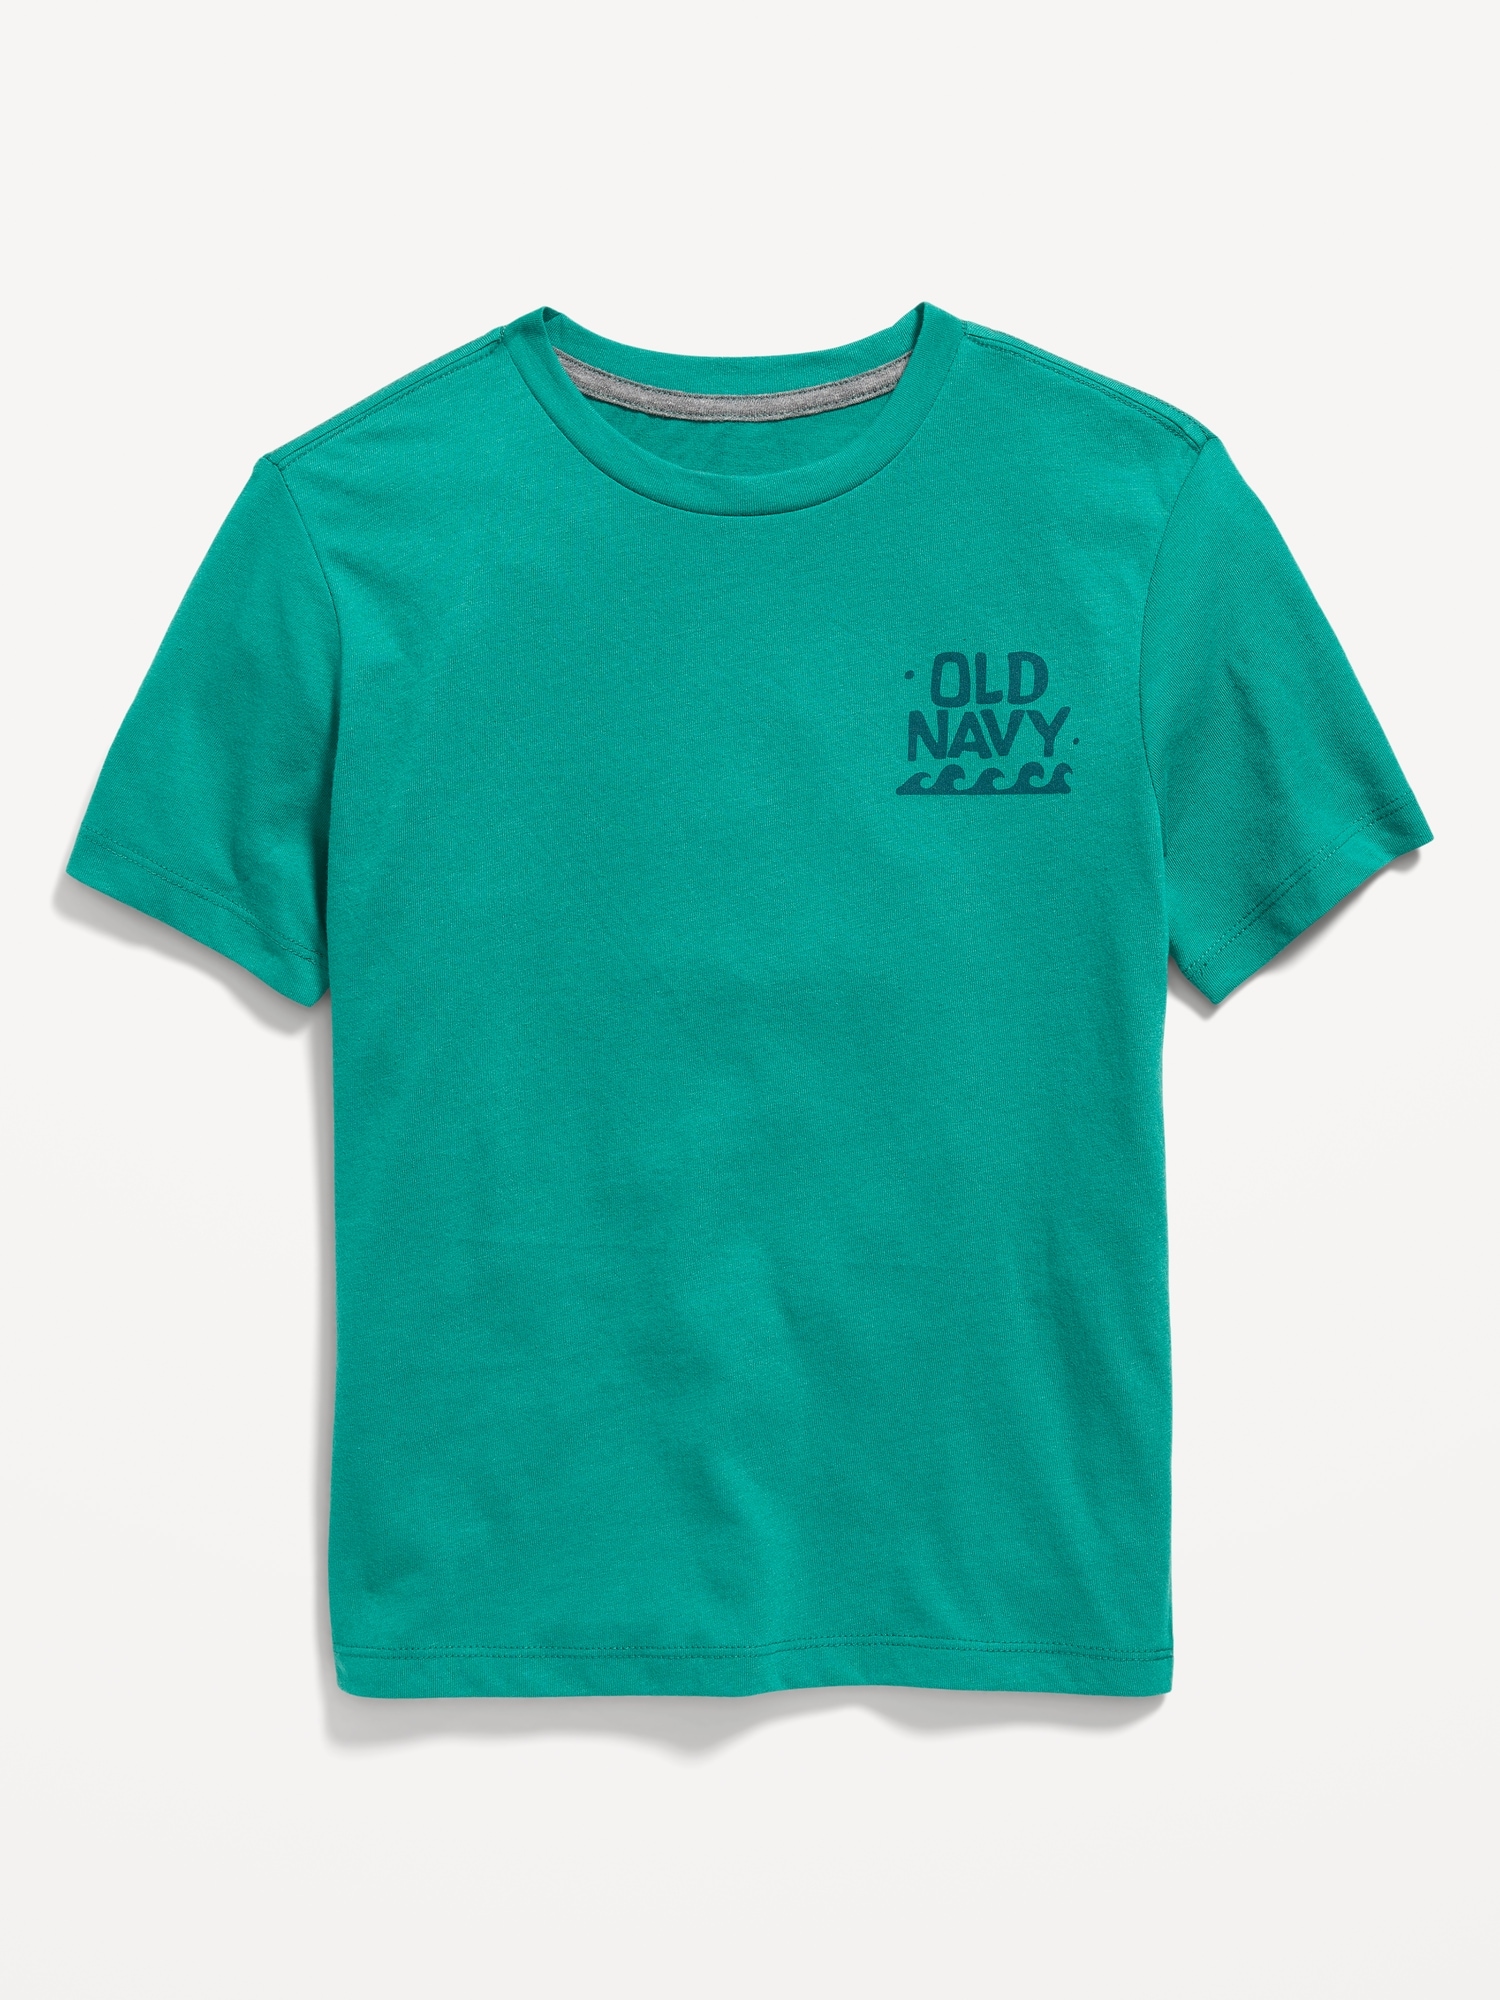 Old Navy Short-Sleeve Logo-Graphic T-Shirt for Boys green. 1